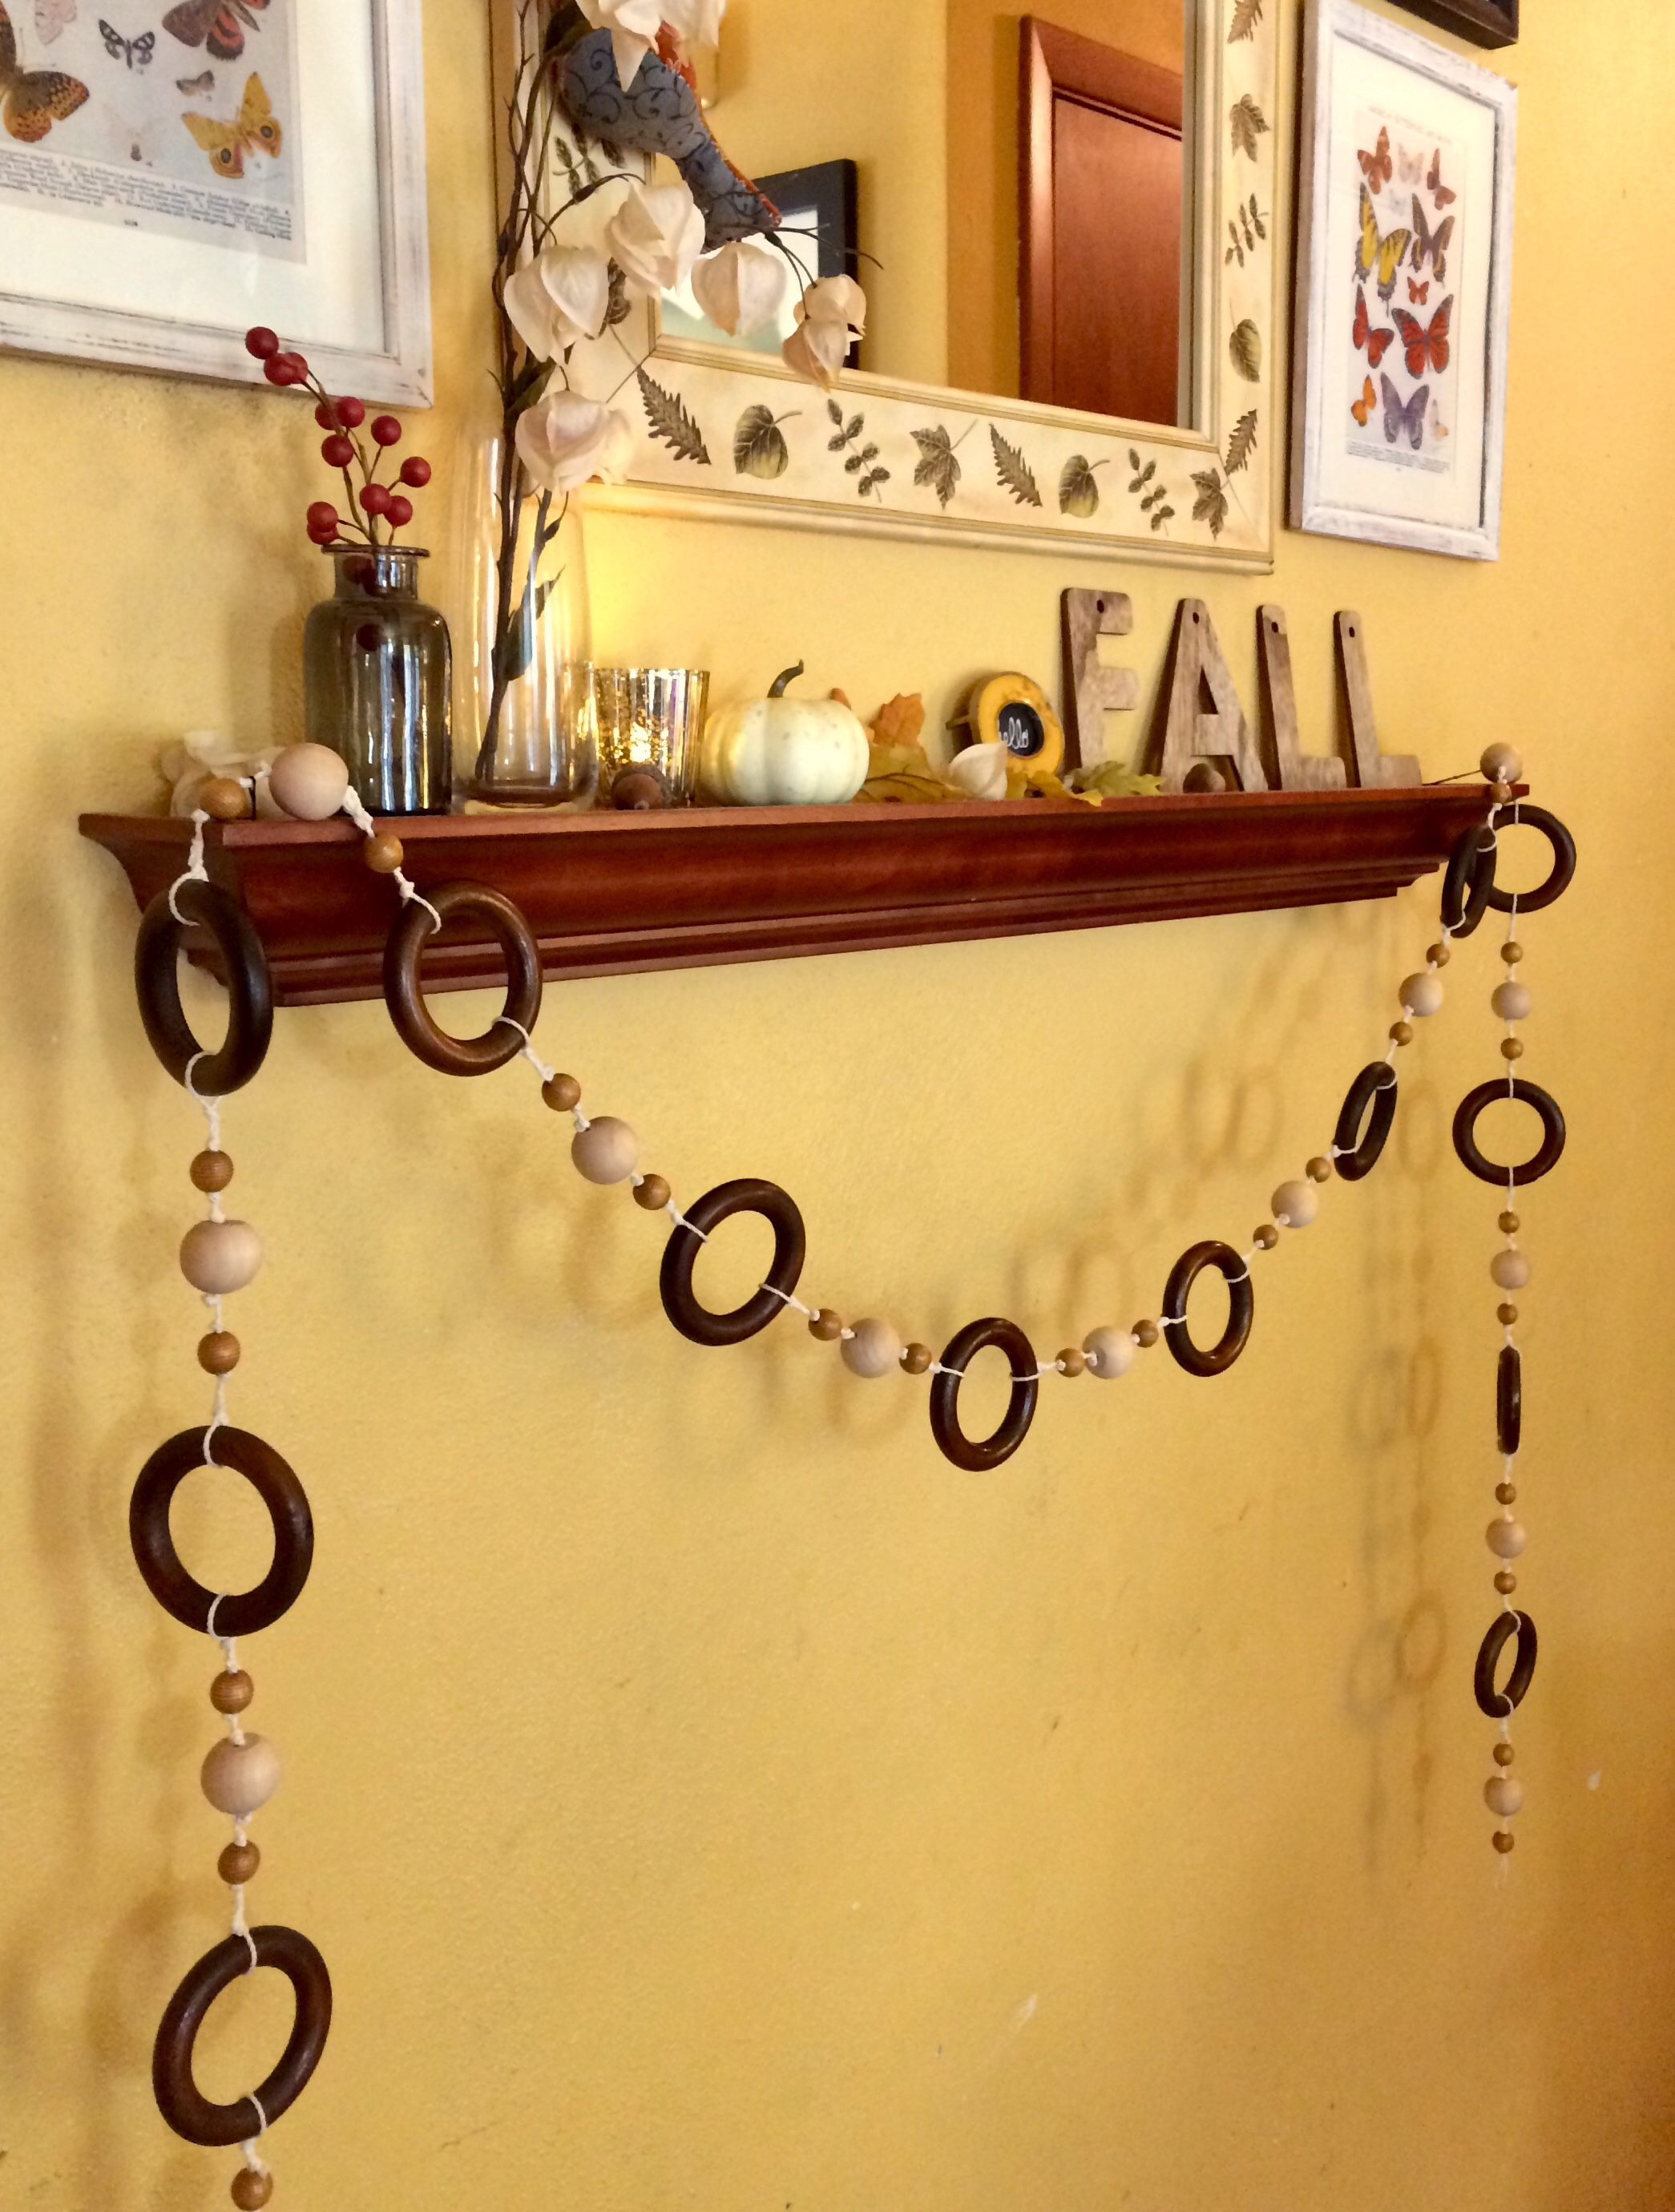 Handmade wood bead garland with vintage wooden curtain rings for fall or autumn decorating on mantel or shelf